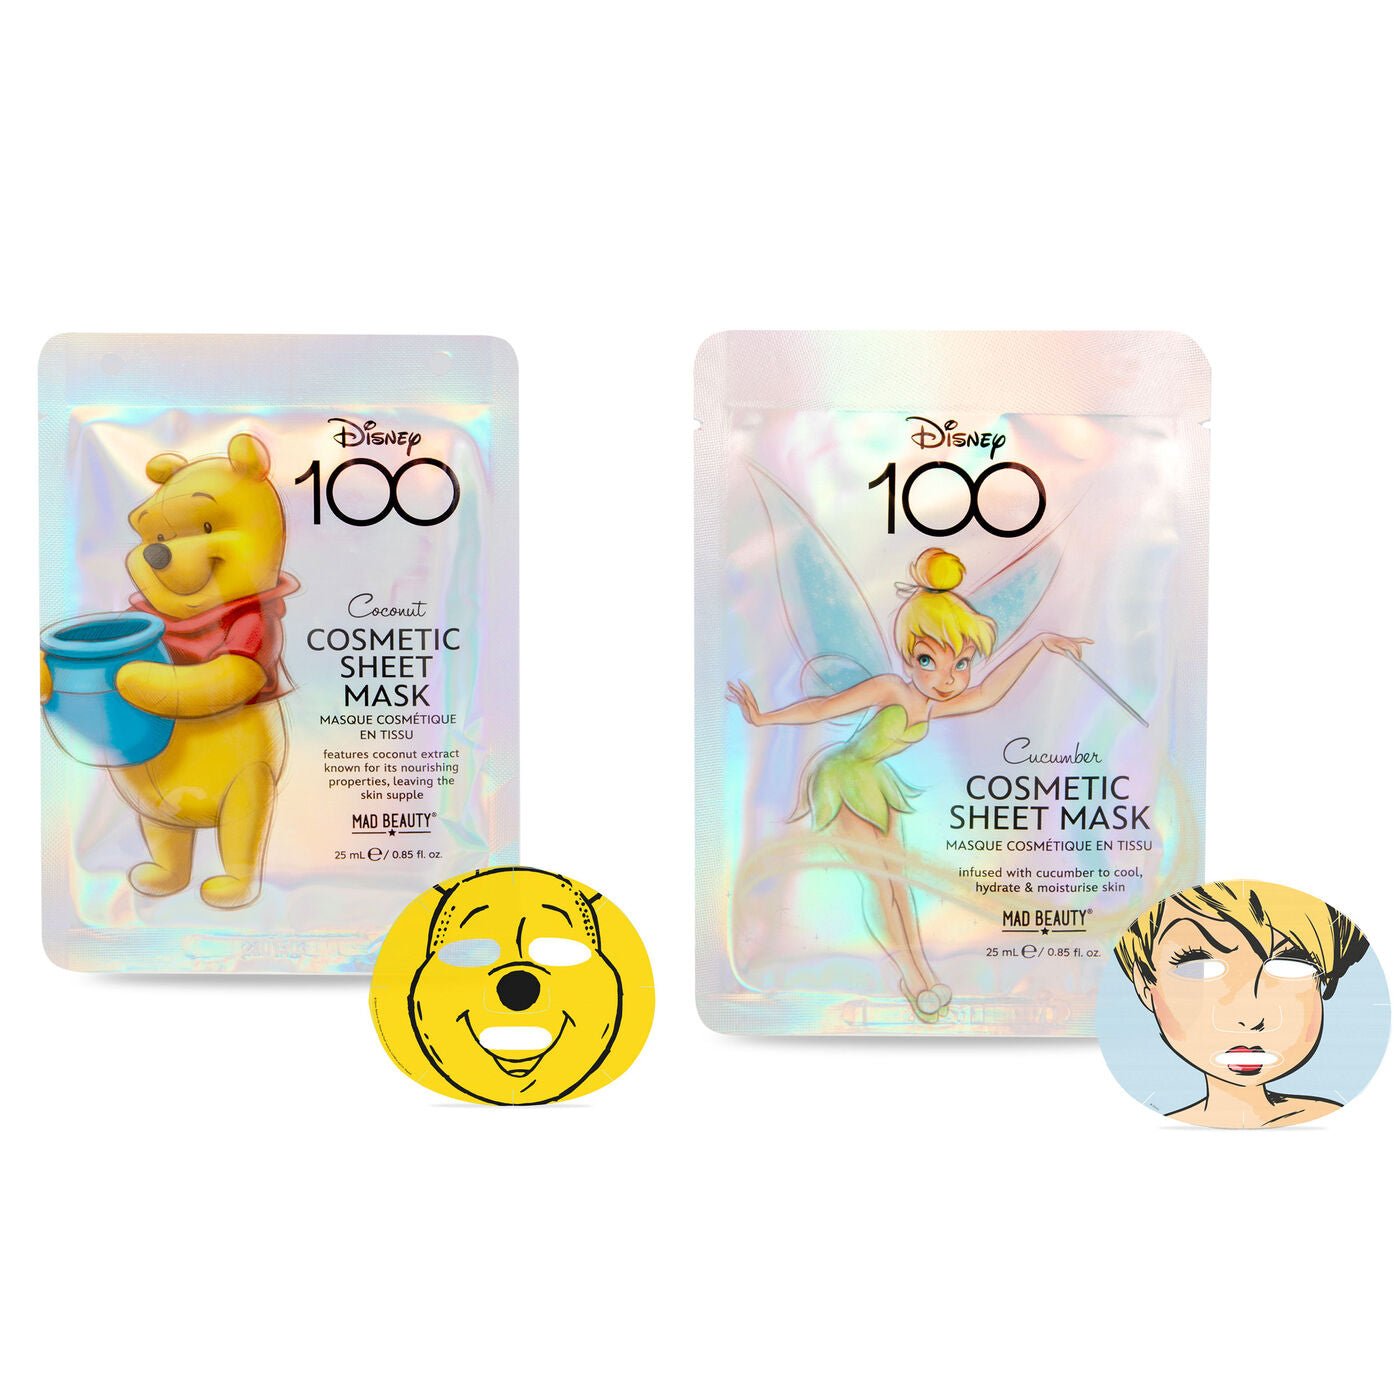 Shop Disney 100 Face Mask Duo - Premium Face Mask from Mad Beauty Online now at Spoiled Brat 